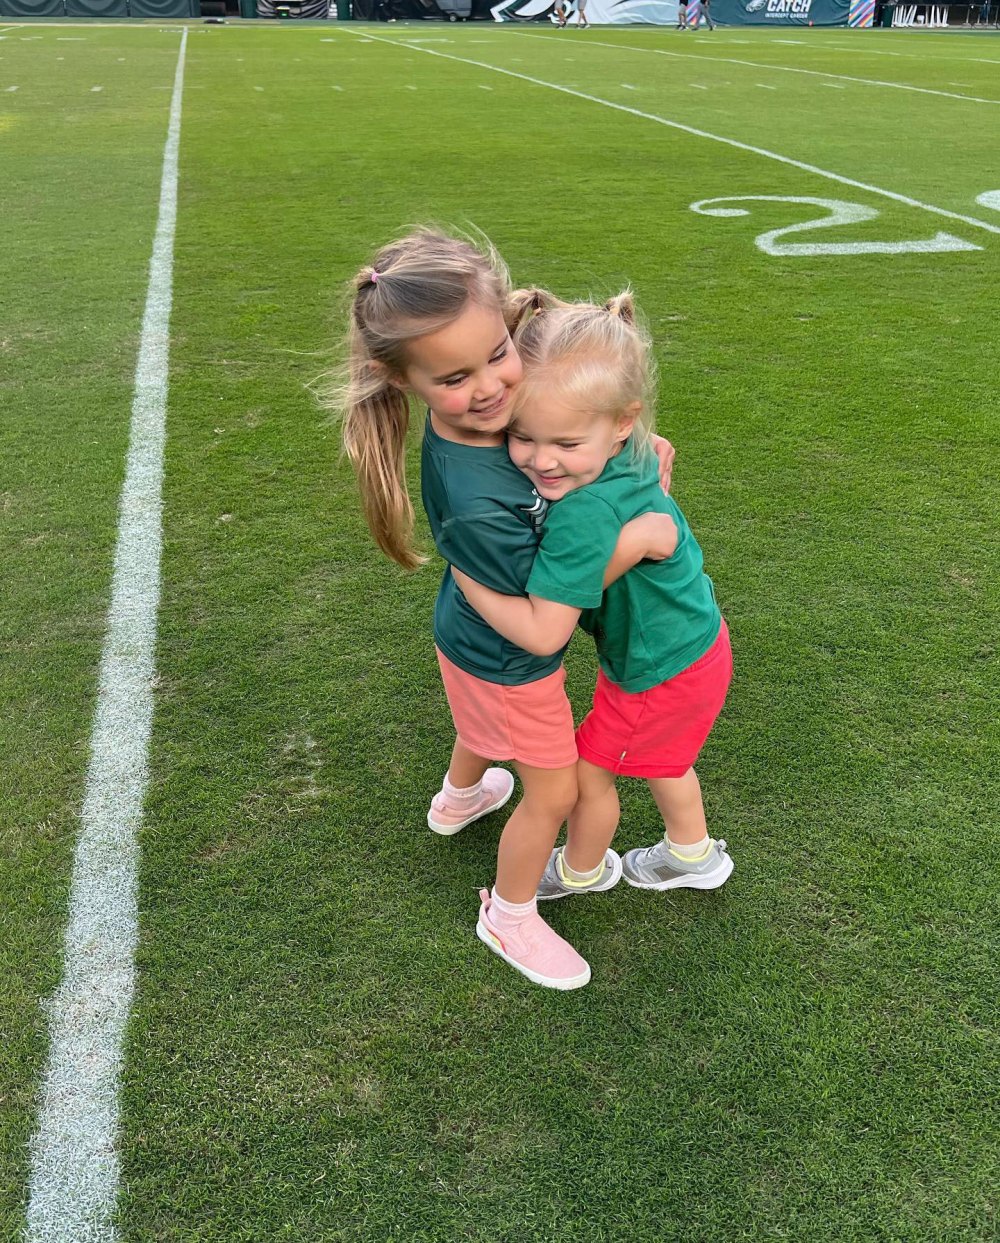 Jason Kelce Wife Kylie Celebrates Youngest Daughter's 1st Official Eagles Game 2